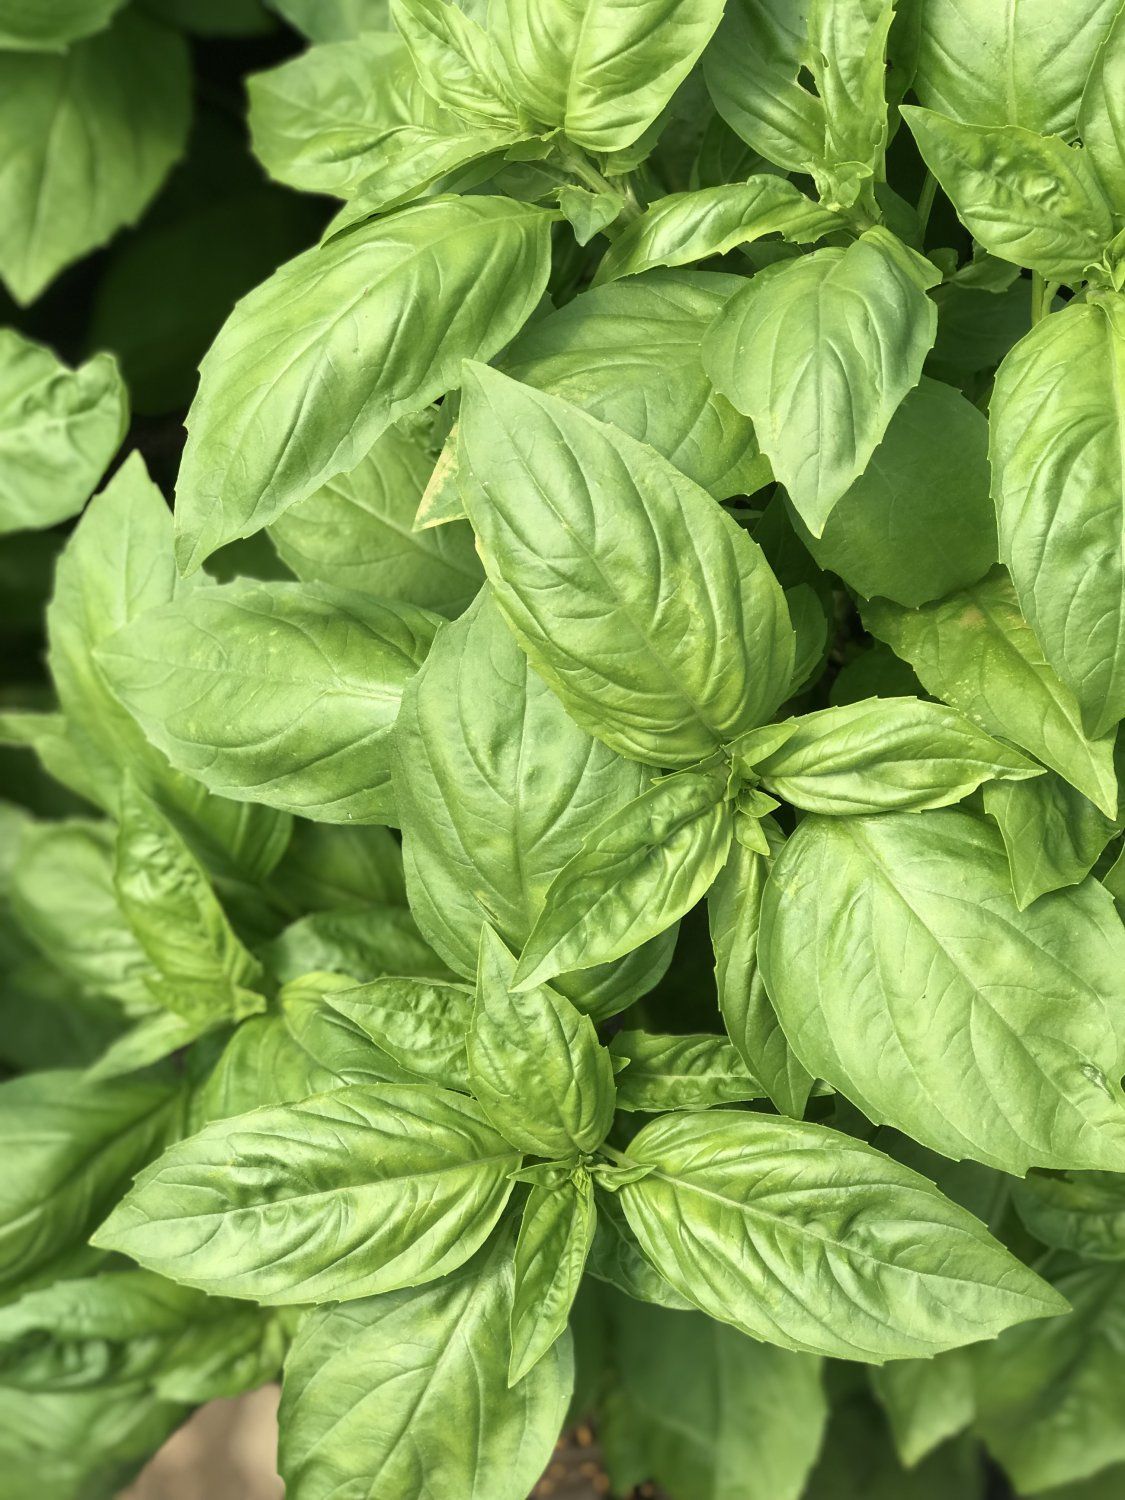 For the love of Basil